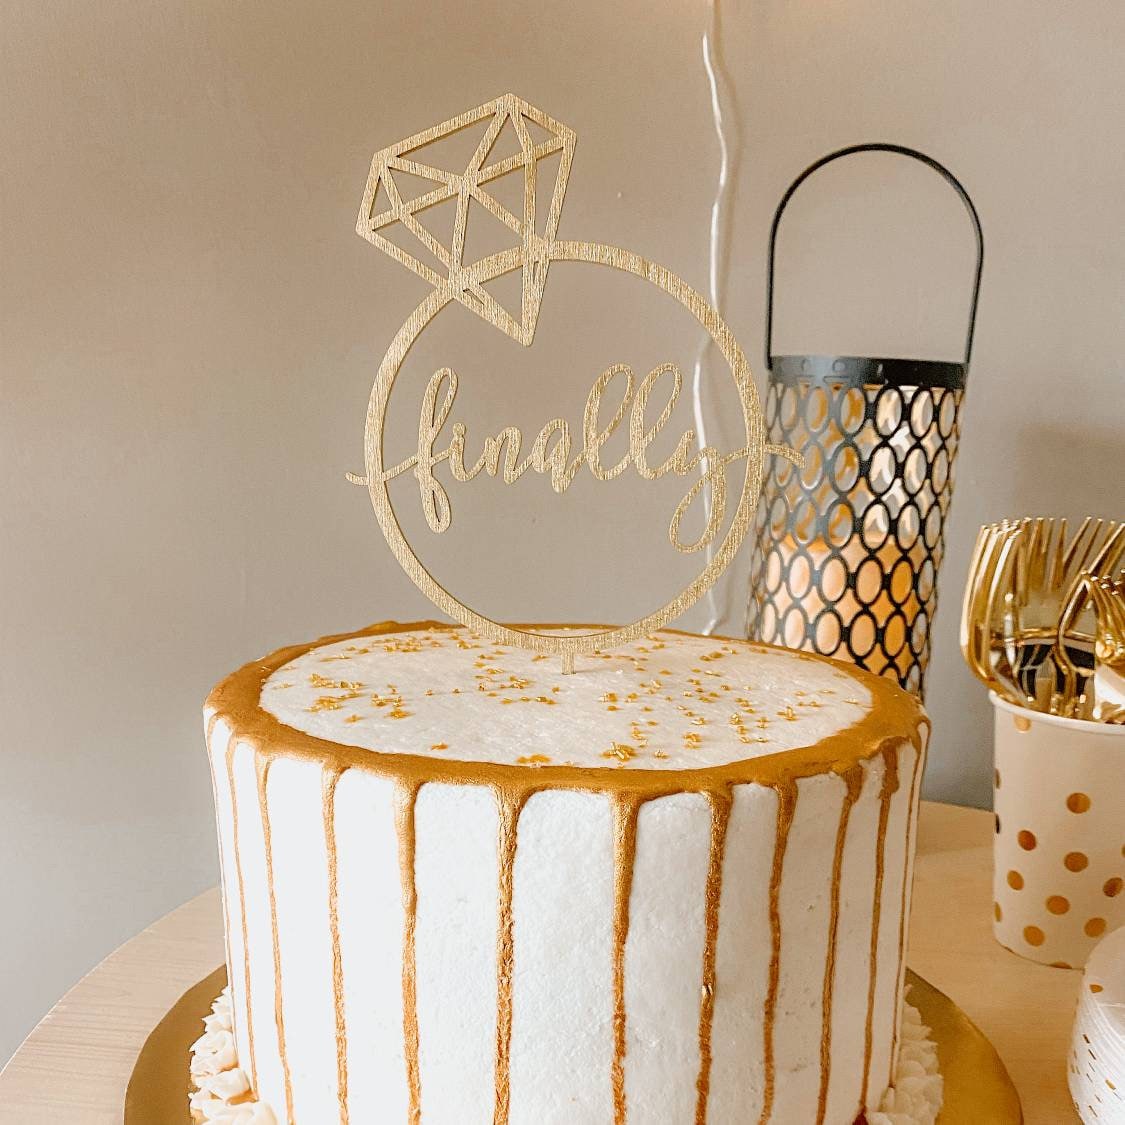 Engagement Ring Two Tier Theme Cake